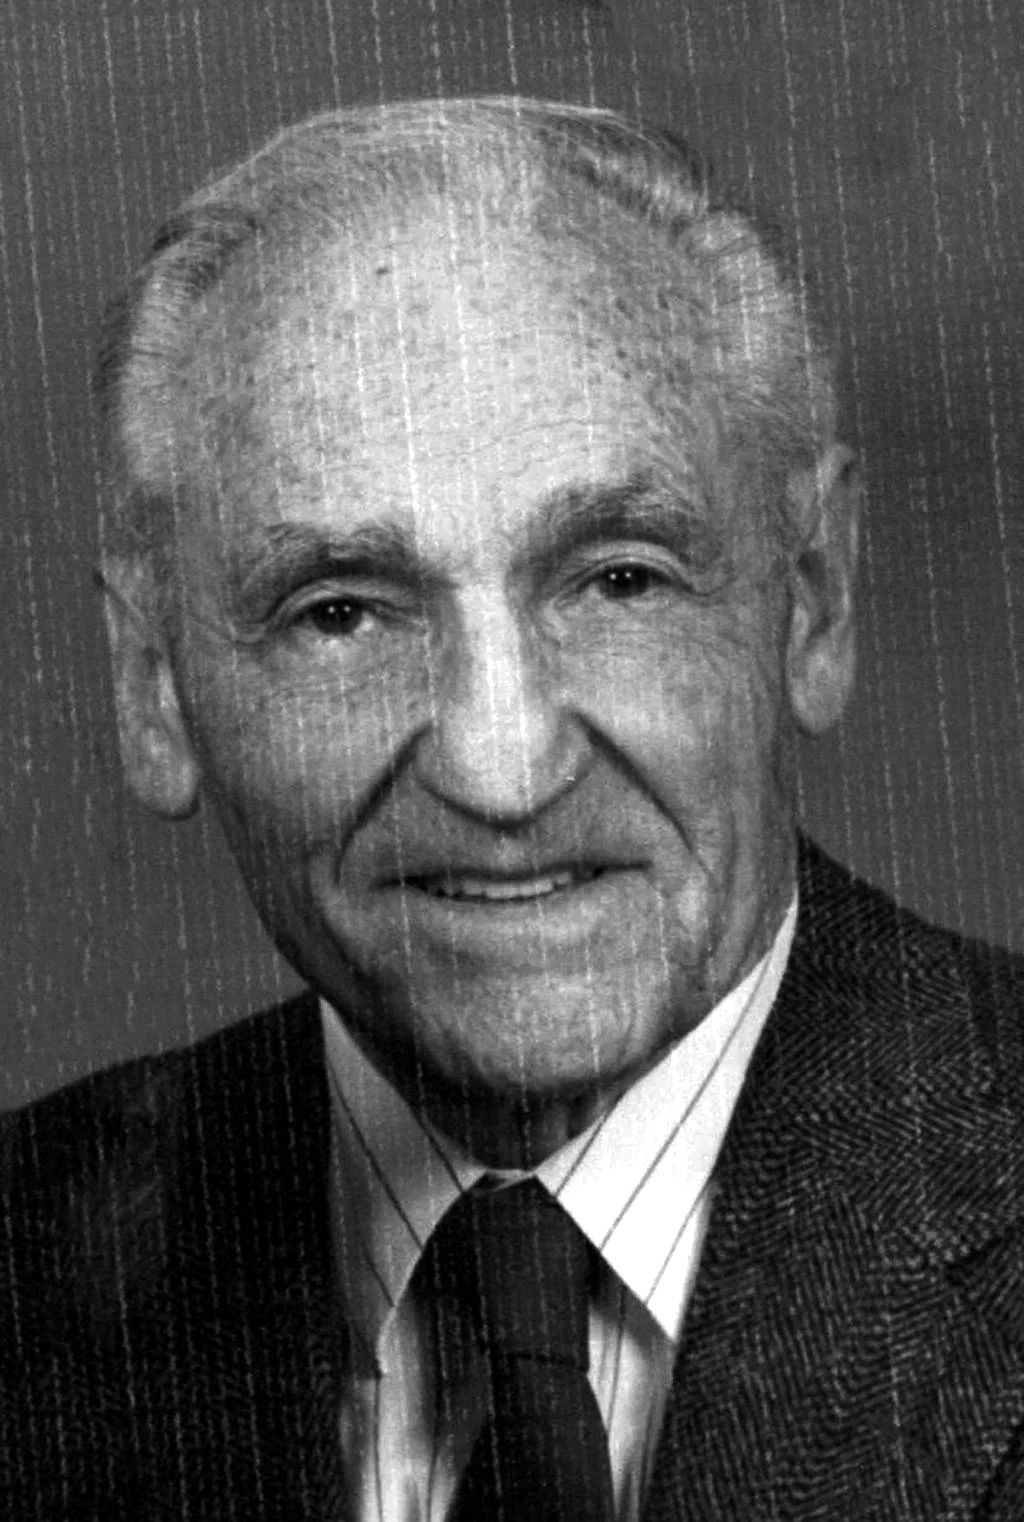 James C. WOLFORD (1920-2019)